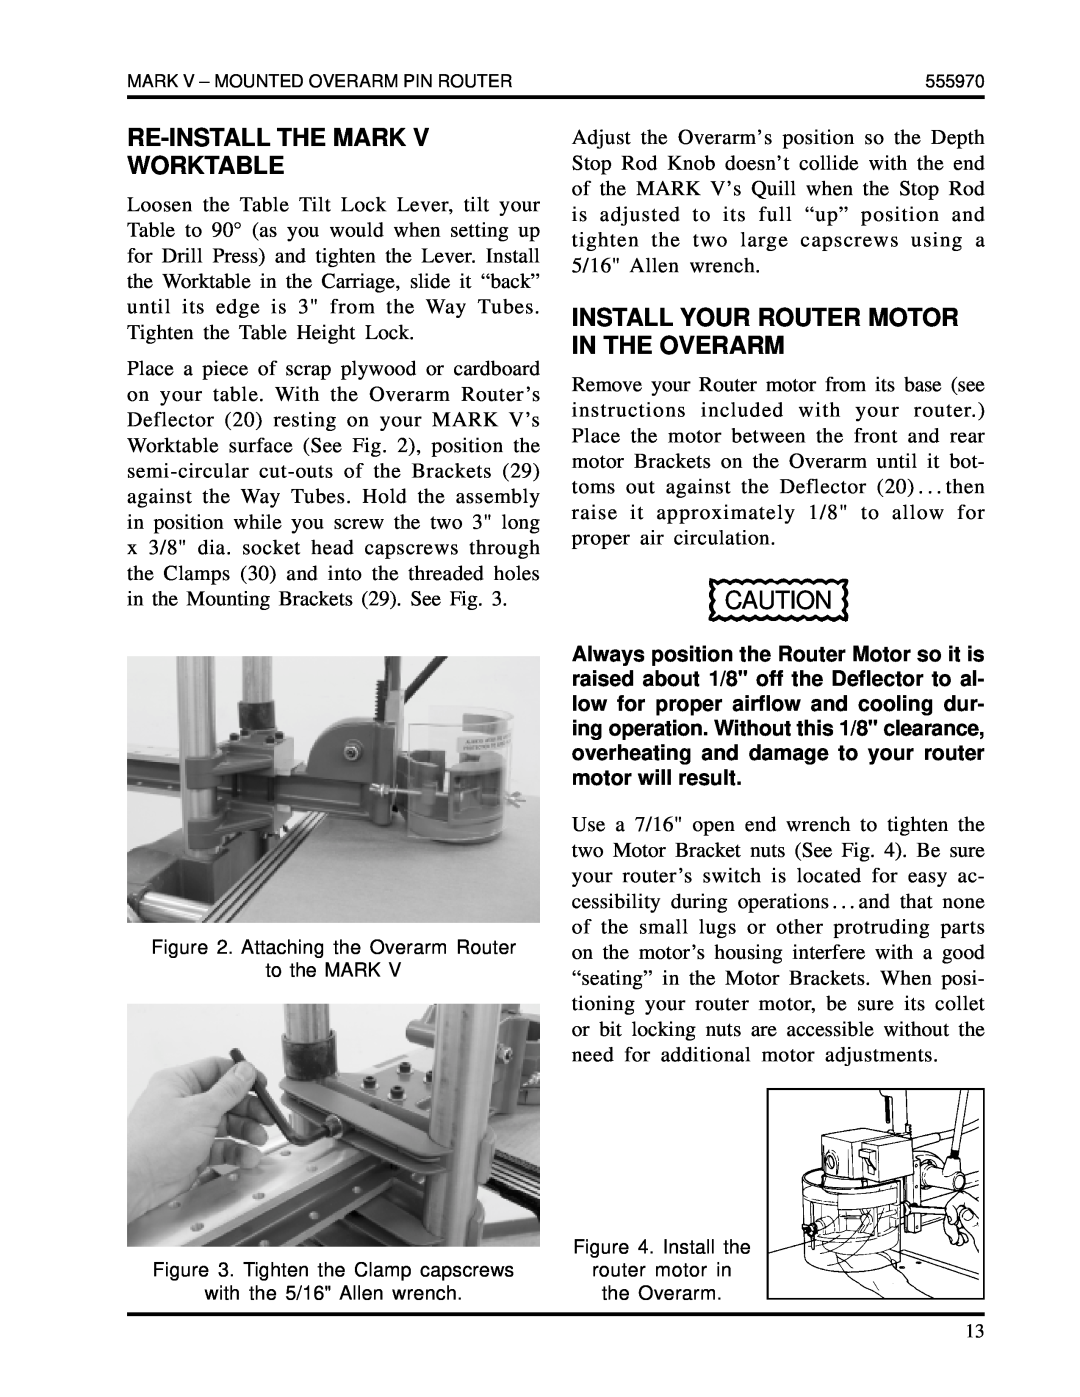 Shopsmith 555970 Re-Installthe Mark Worktable, Install Your Router Motor In The Overarm, Attaching the Overarm Router 